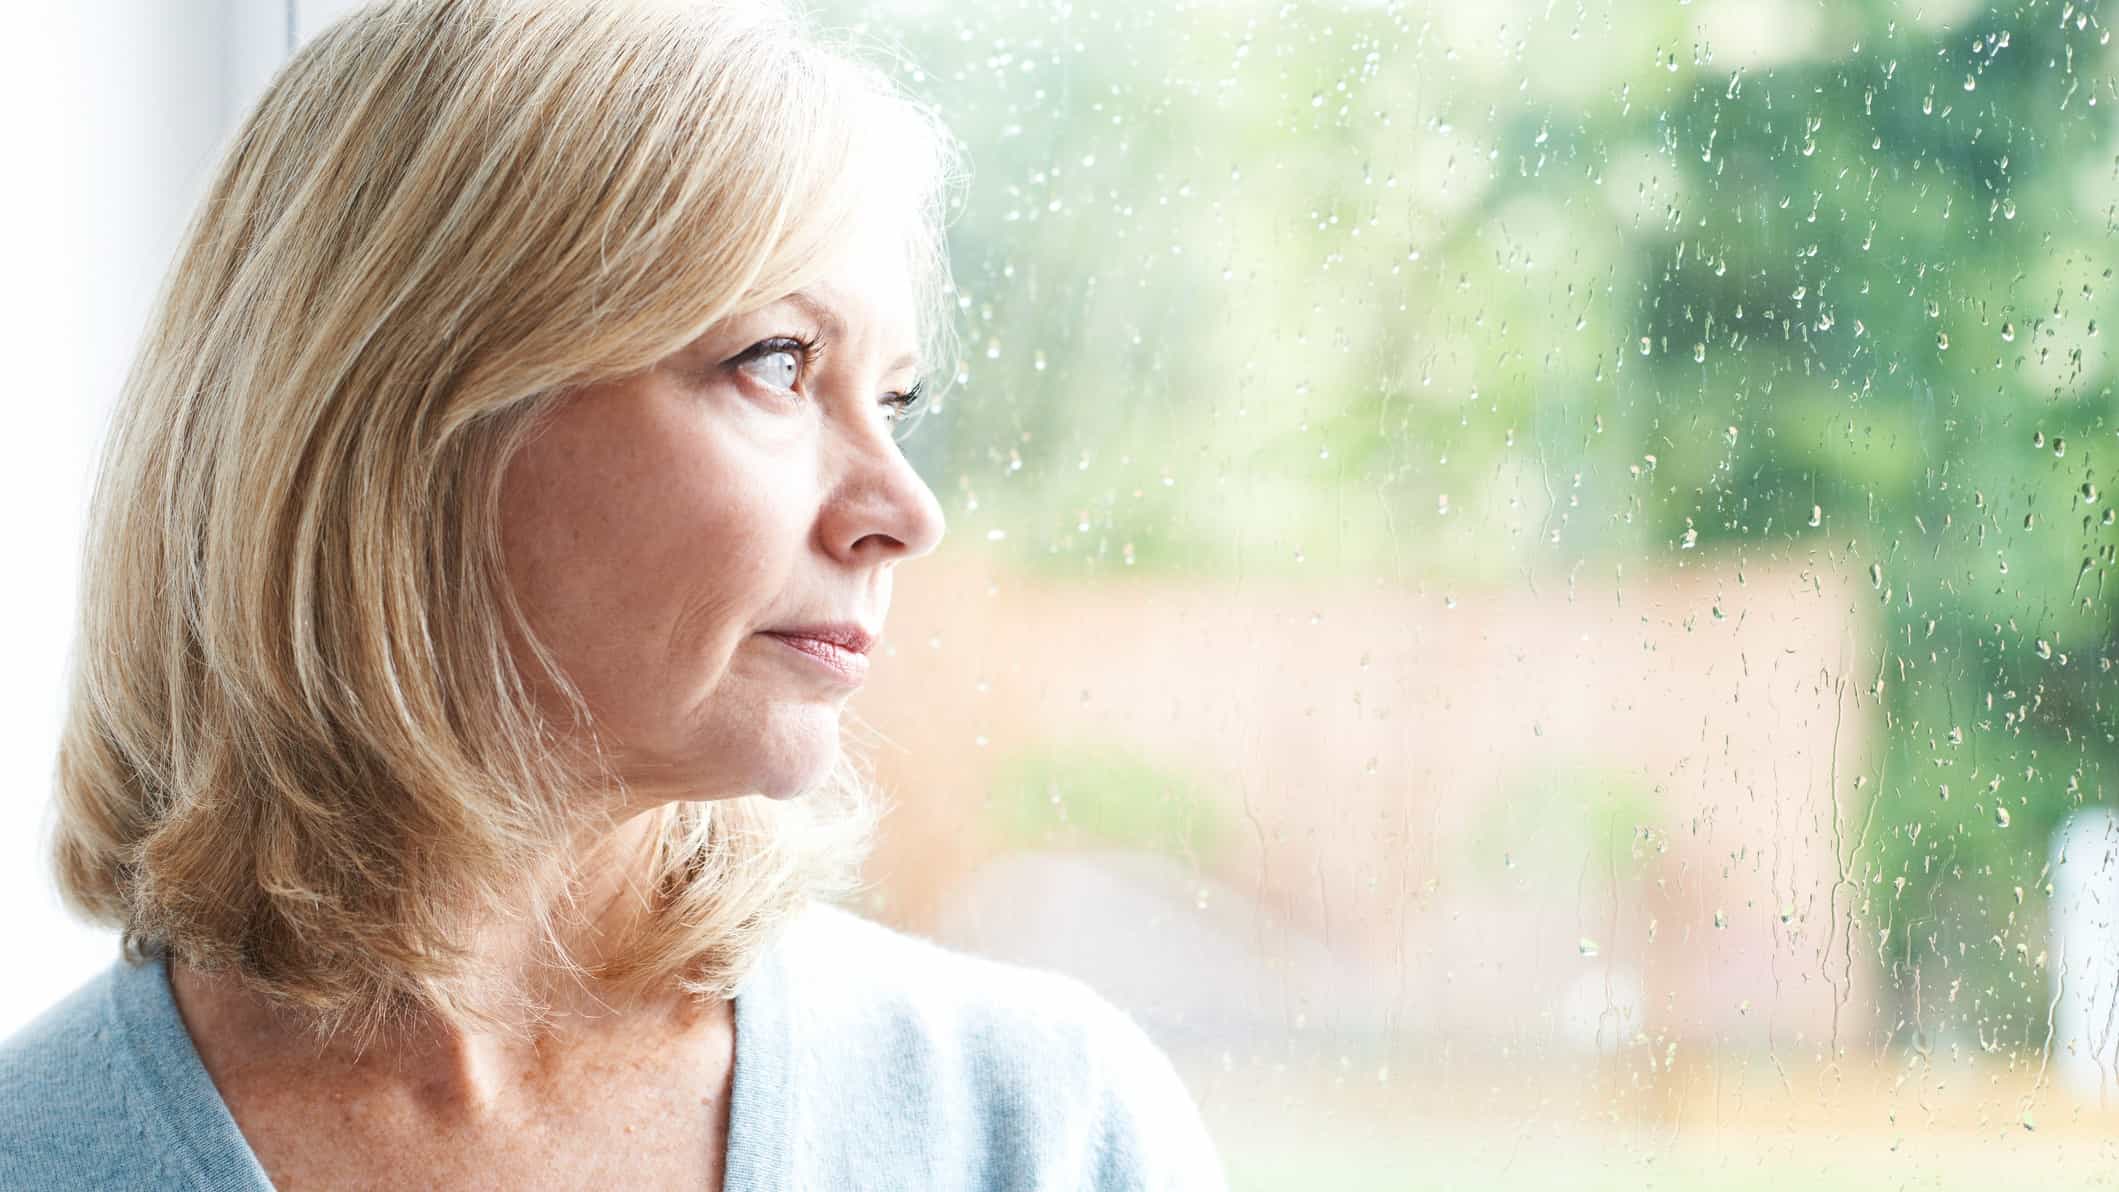 a woman looks out a window splattered with rain with a pensive look on her face.